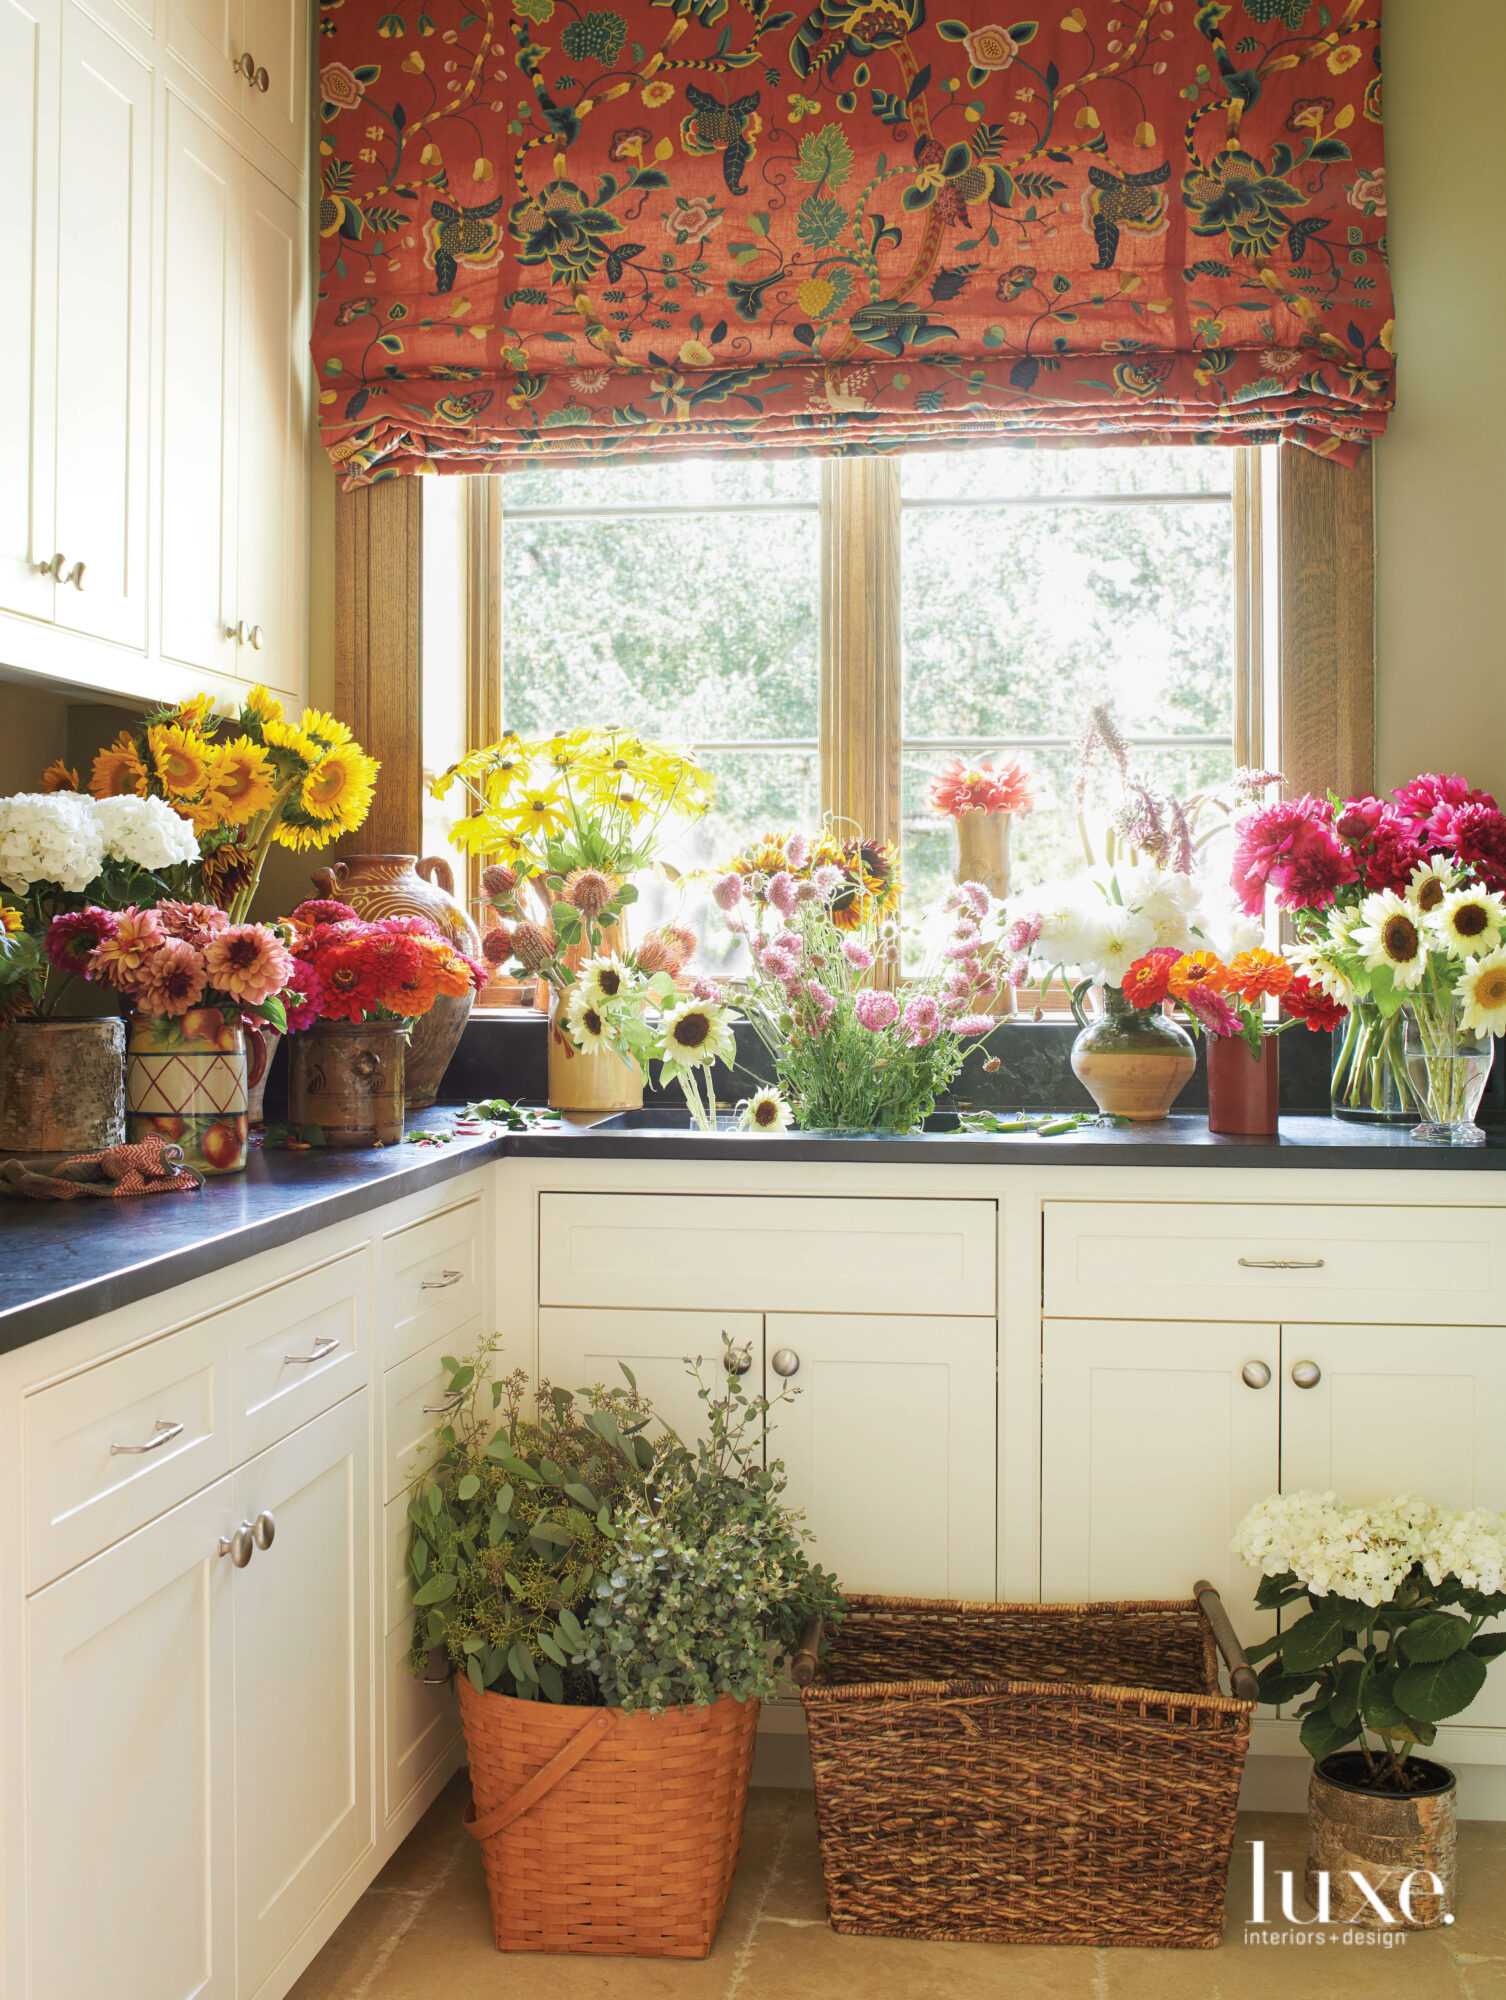 A flower arranging and cutting room is laden with blossoms.